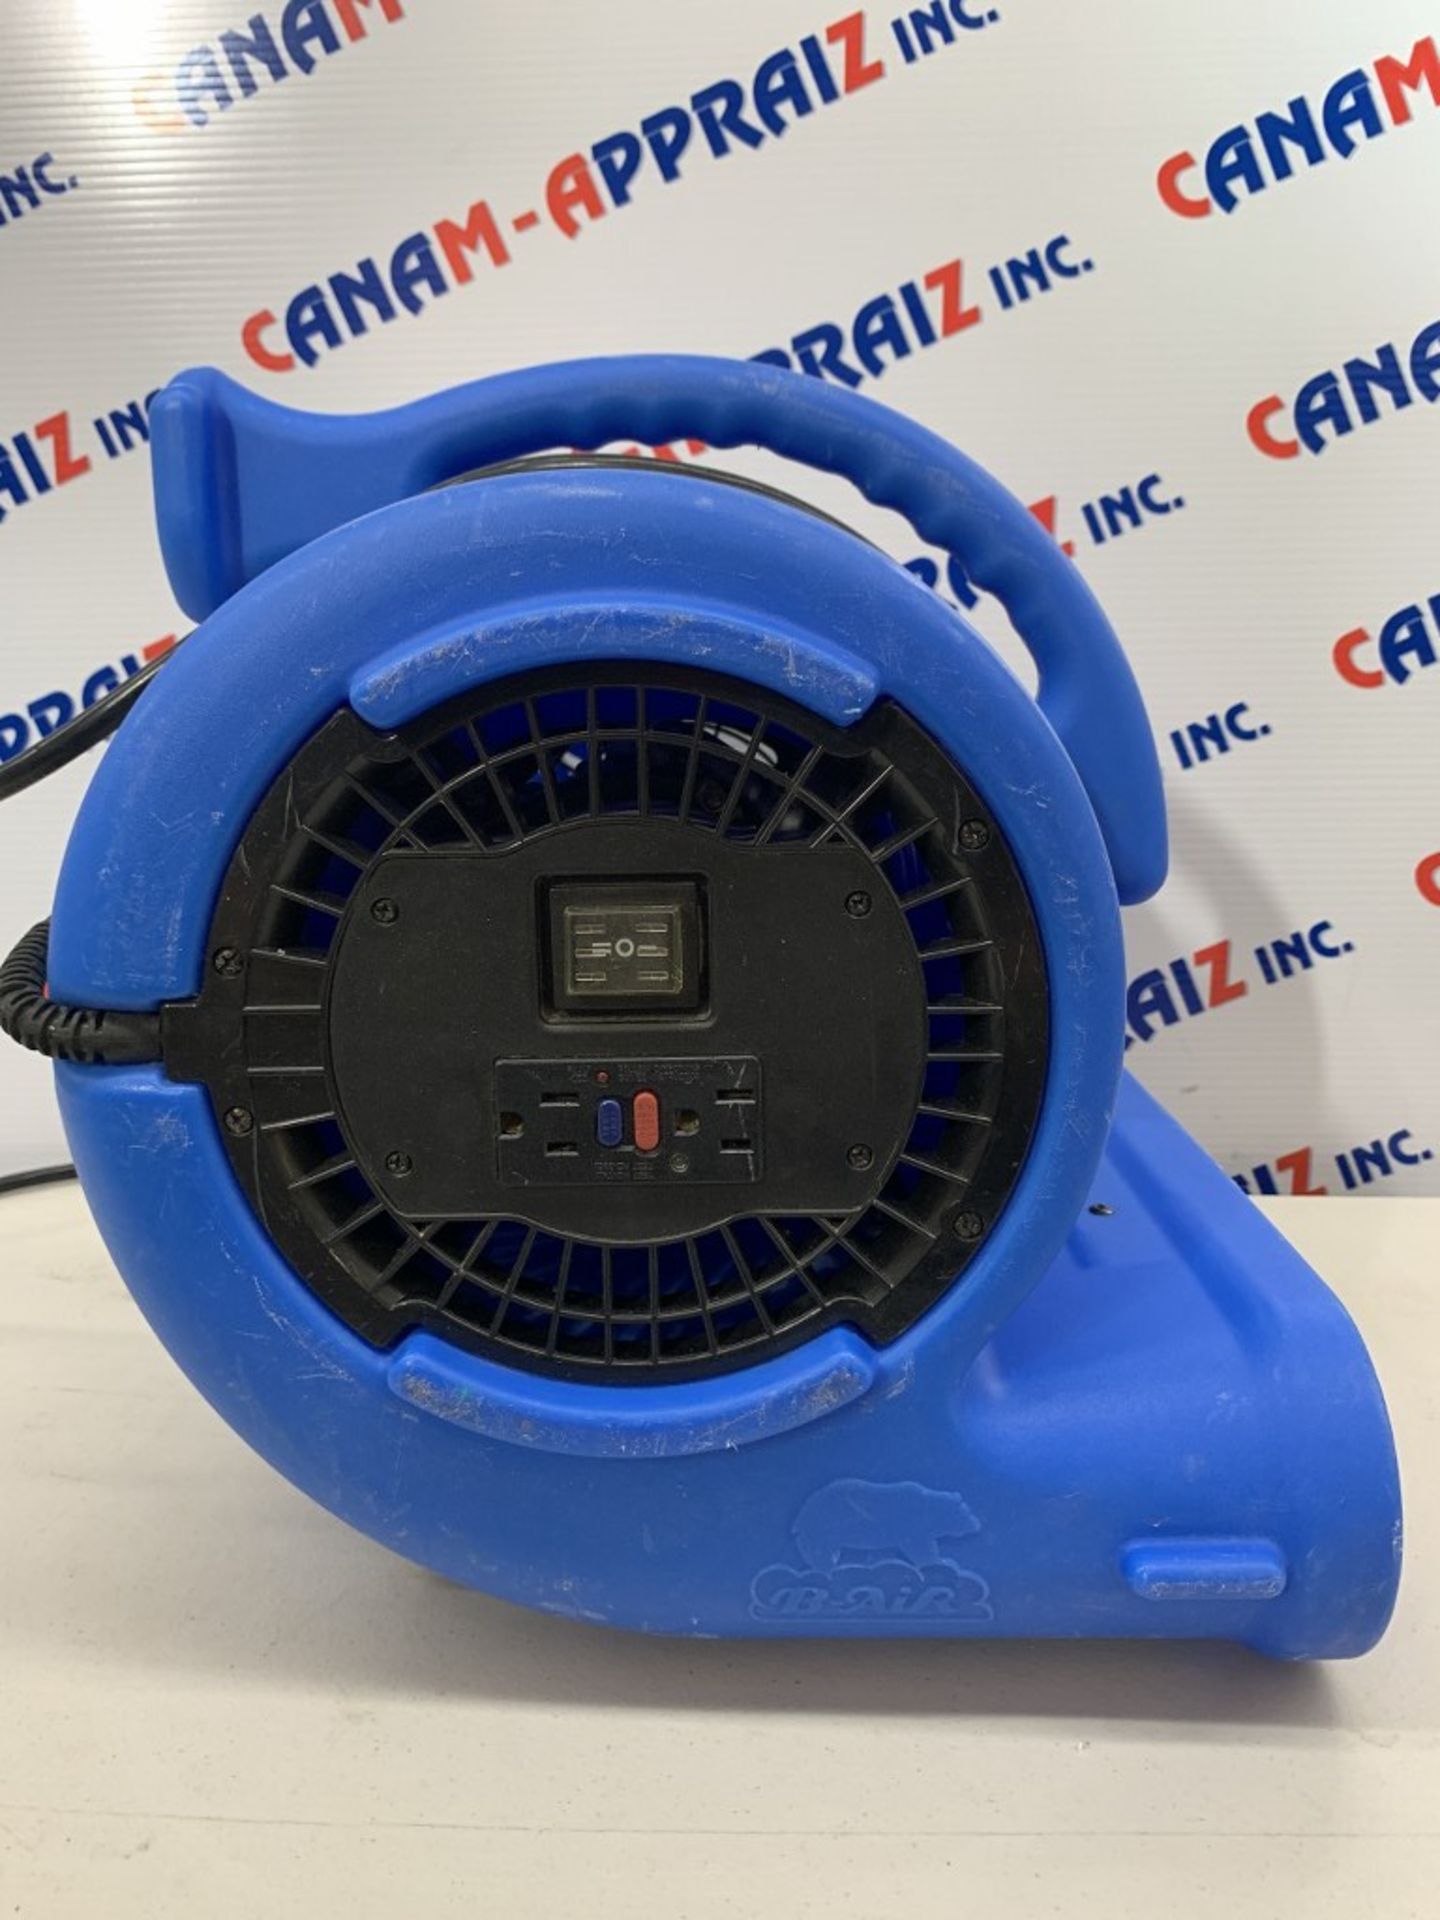 B-AIR - AIR MOVER/VENT POWER 1/3HP - MODEL # VP-33 - Image 3 of 5